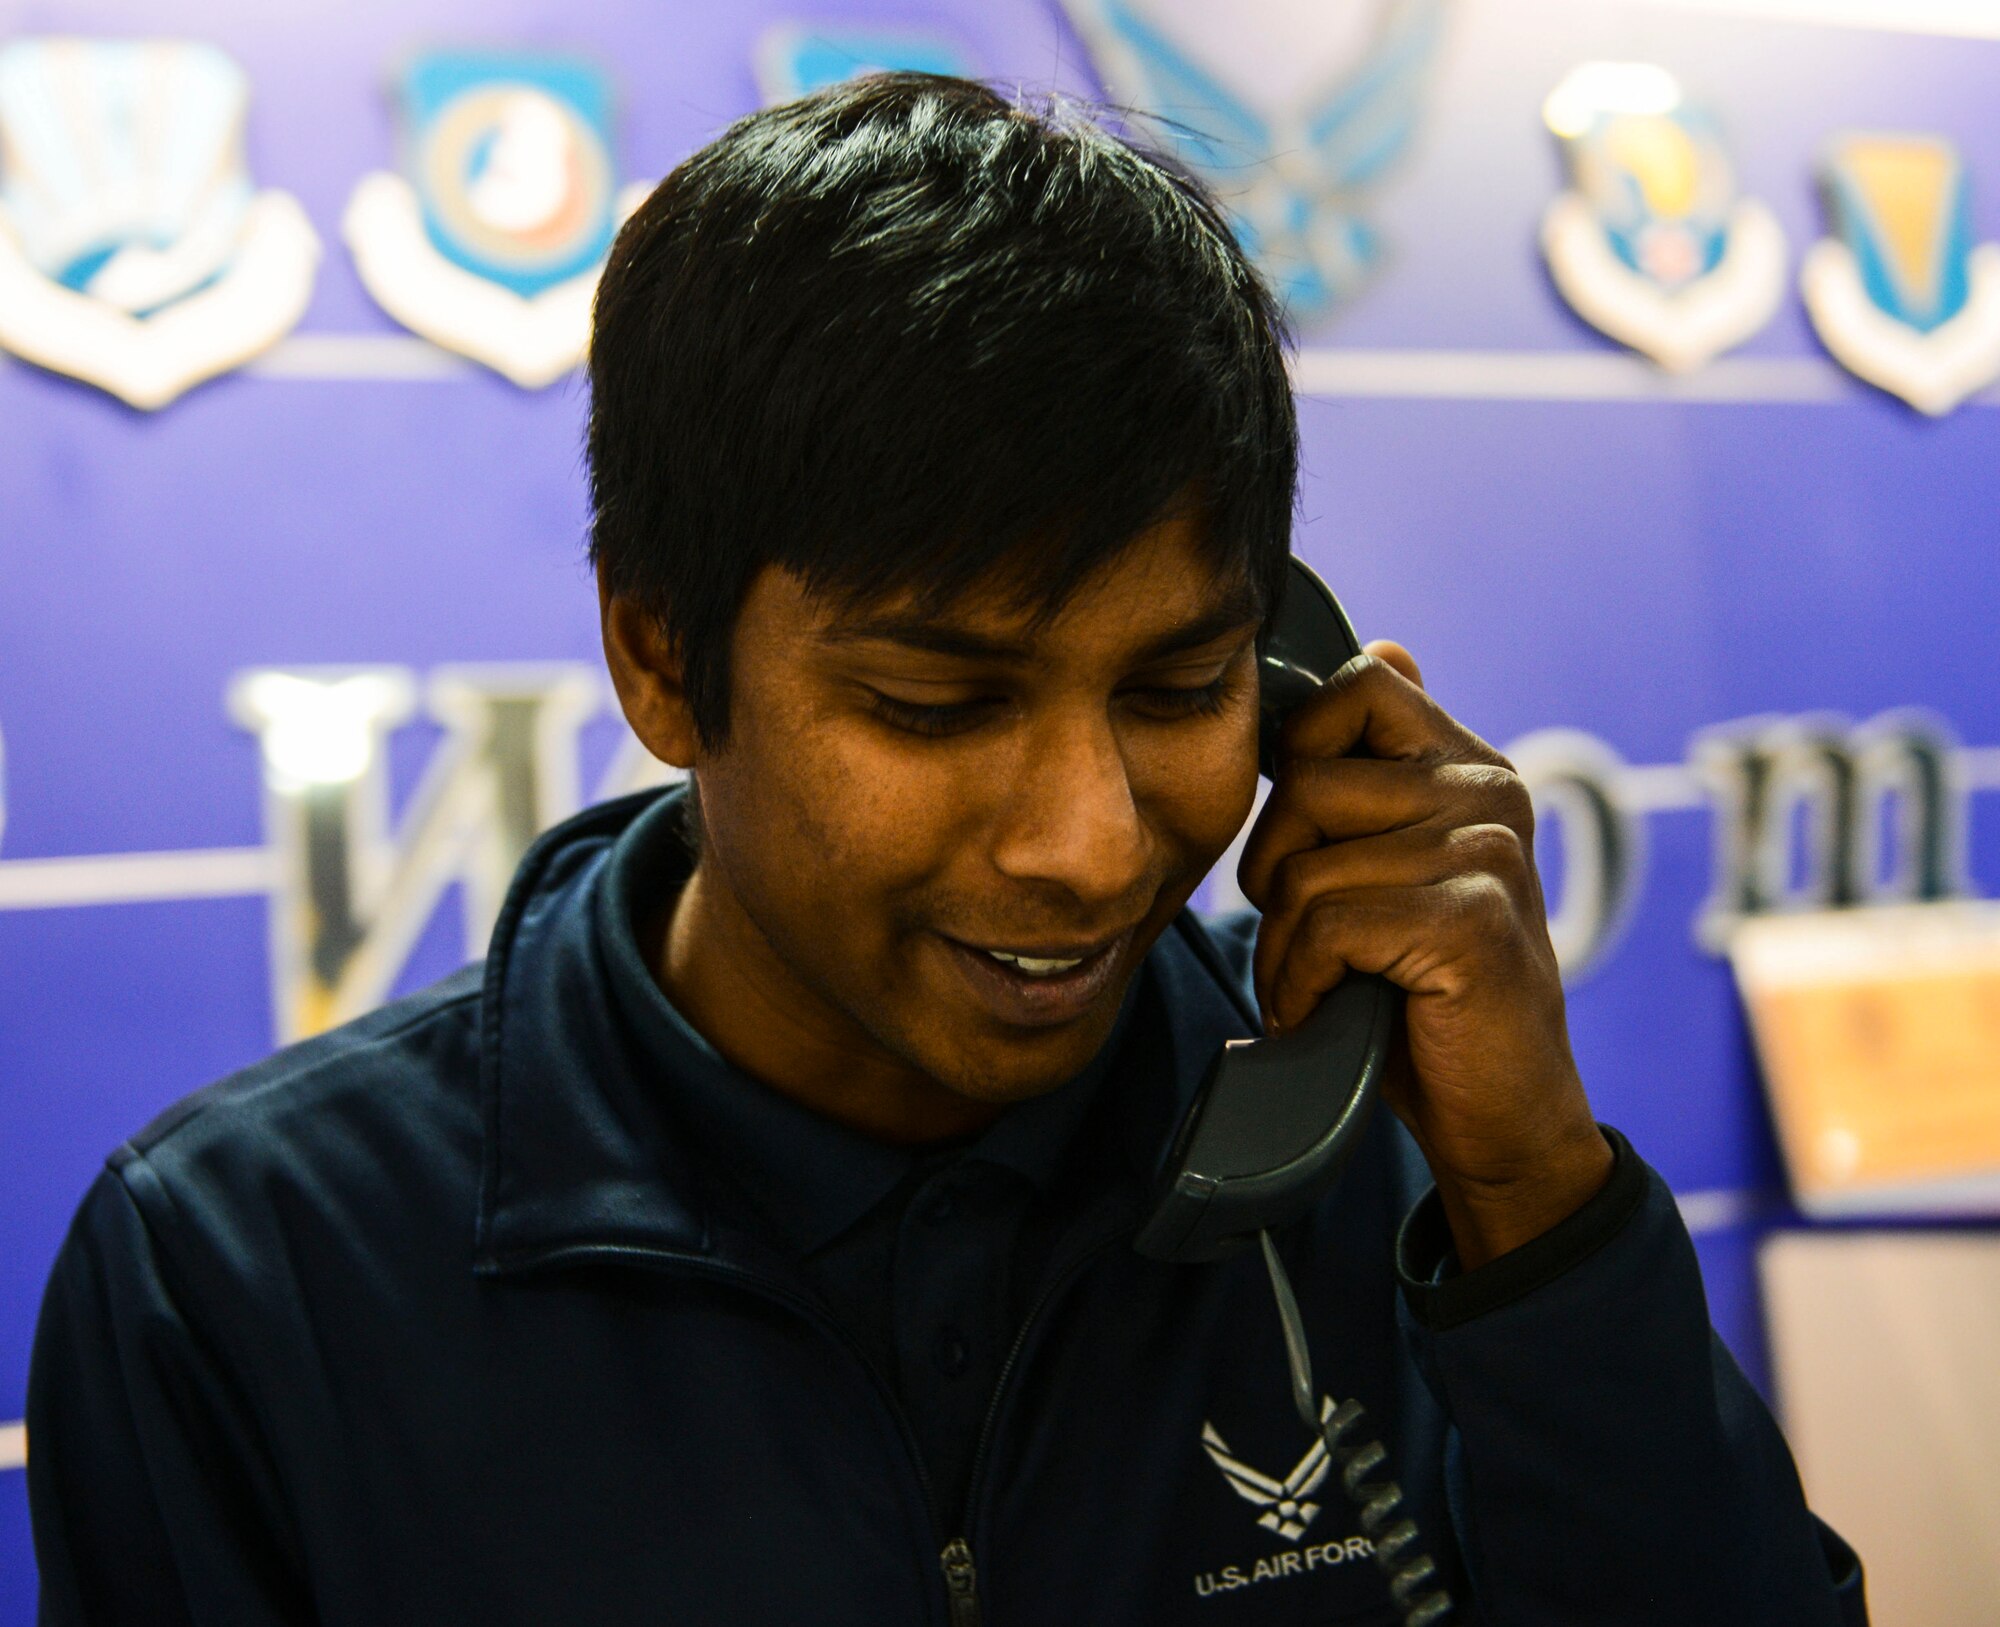 Victor Trey, 786th Force Support Squadron recreation assistant, answers a phone call at the Southside Fitness Center at Ramstein Air Base, Germany, Oct. 6, 2016. Airmen at Ramstein can call the SSFC to schedule physical training sessions, PT tests or inquire about fitness classes. (U.S. Air Force photo by Airman 1st Class Joshua Magbanua)